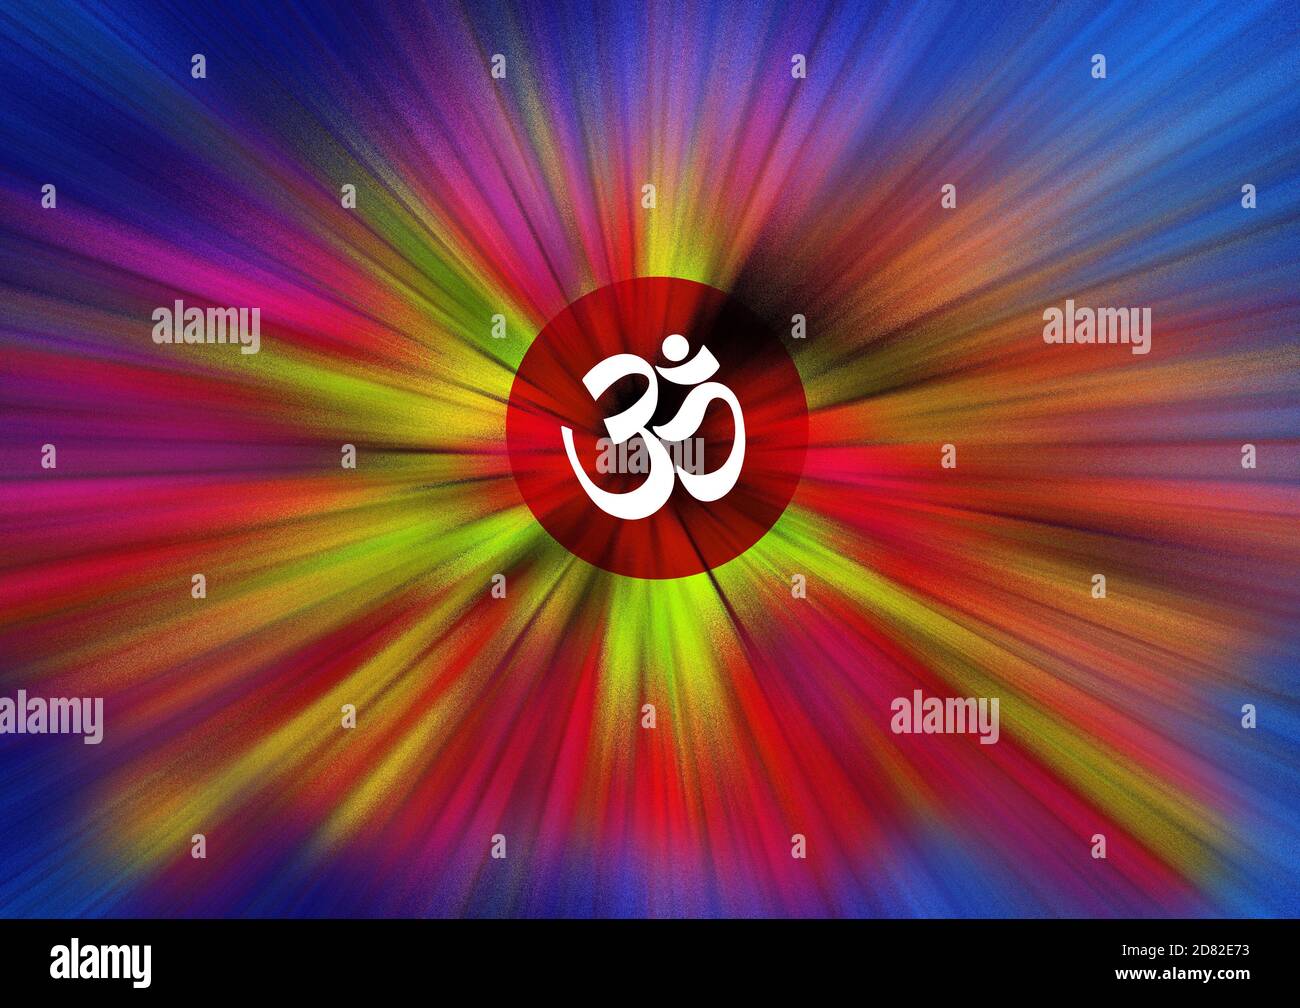 Om Aum yoga powerful rays religious abstract background. Geometric circular centric motion effects pattern elements. Dynamic starburst colorful lines. Stock Photo